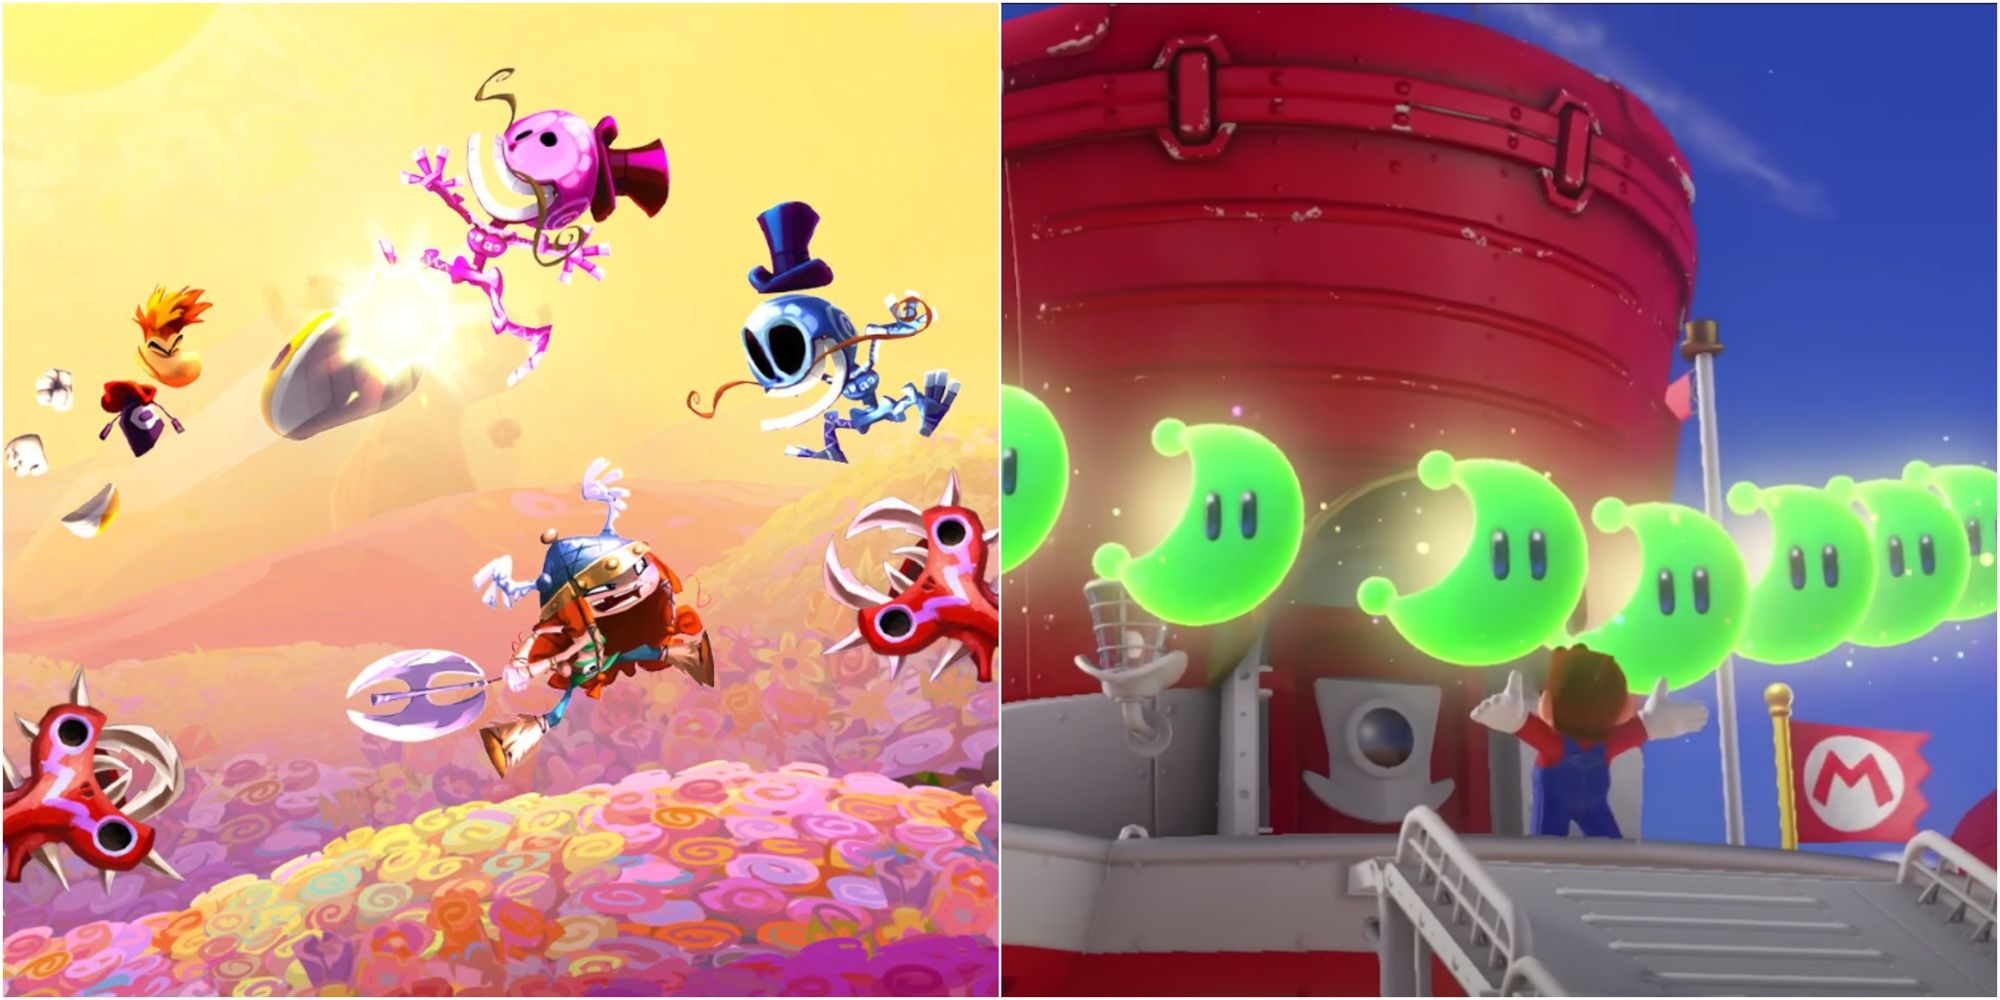 Rayman Legends and Mario Odyssey